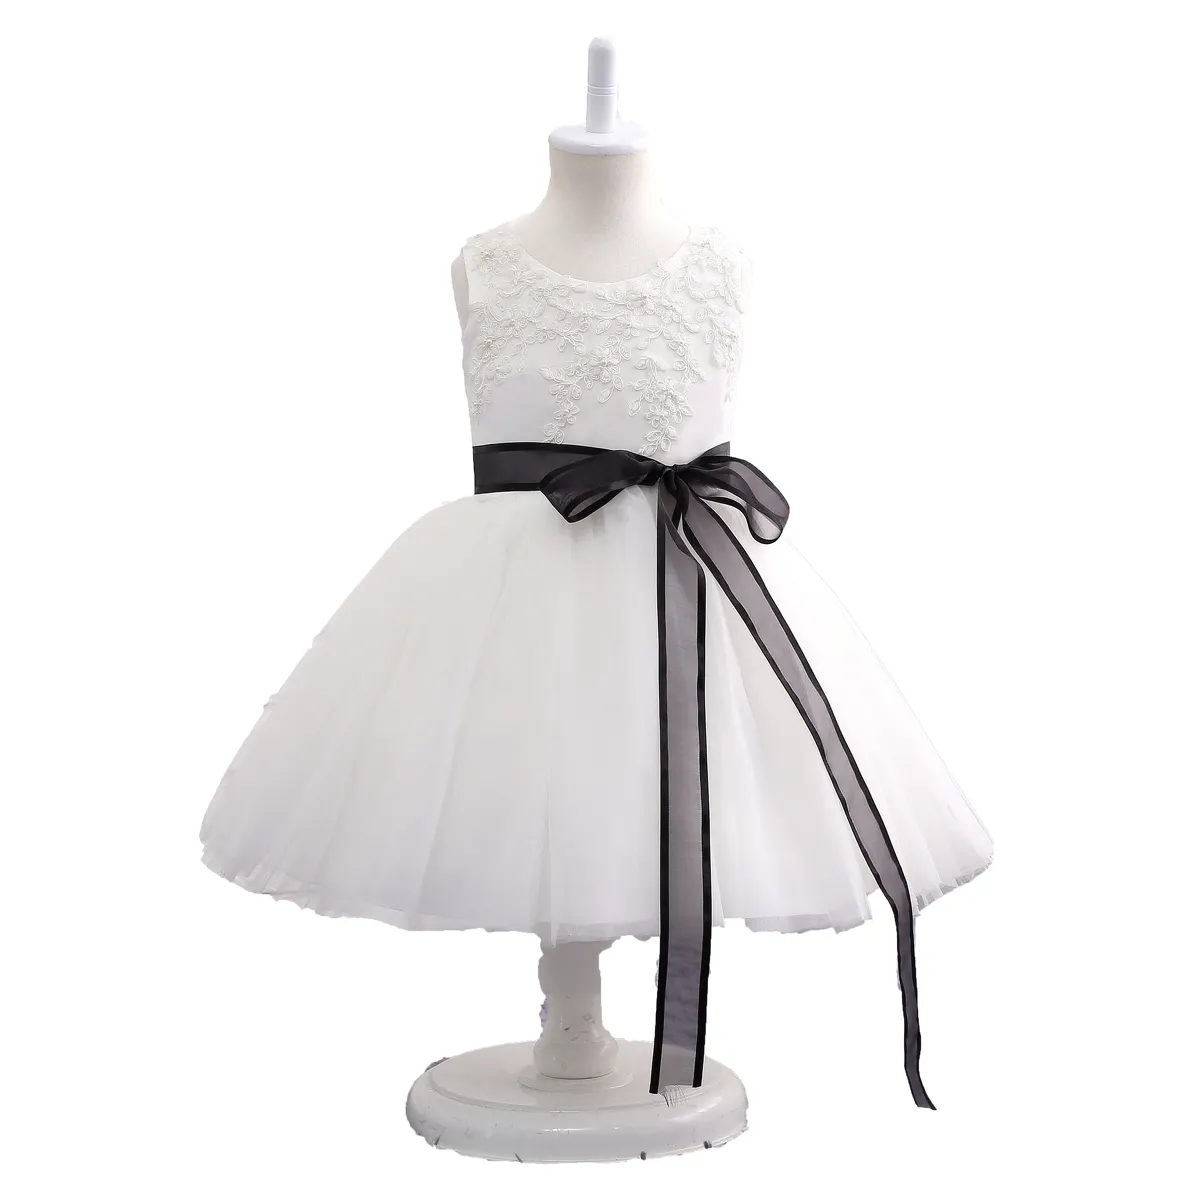 Factory direct manufacturer of white lace tulle flower girl dresses for wedding low prices